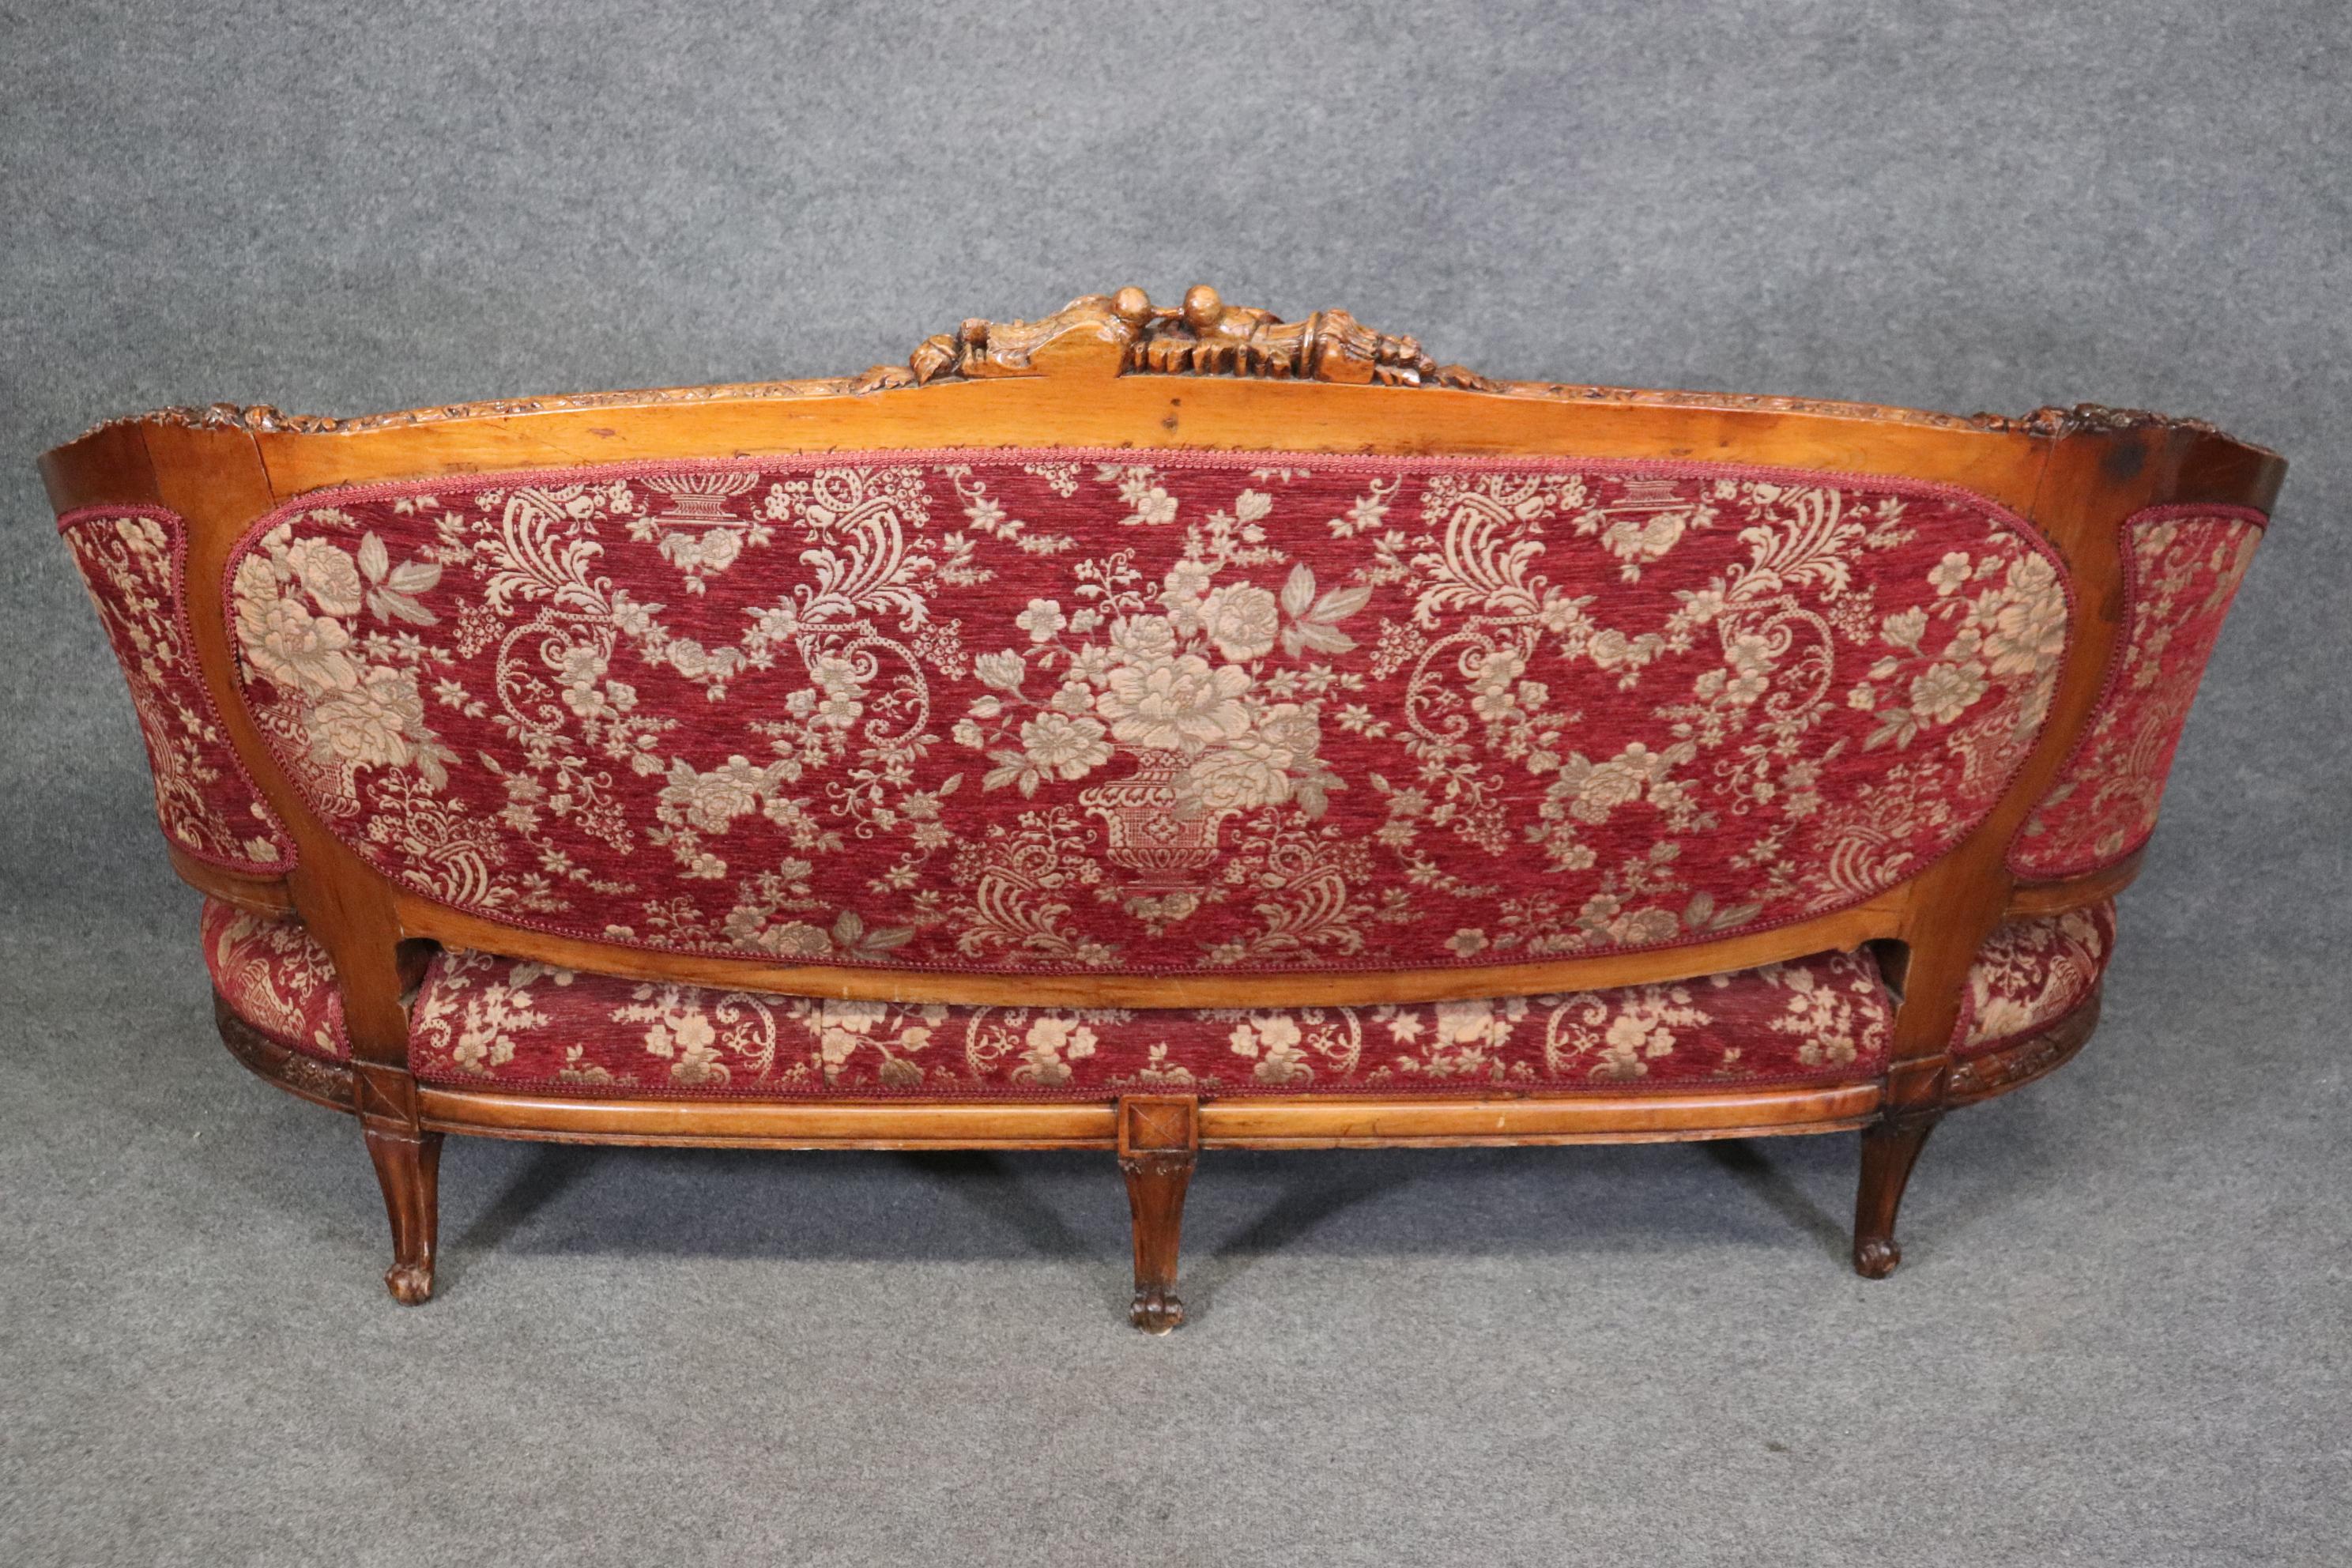 Early 20th Century Rare form of French Louis XV Kissing Birds Carved To Death 1920s Sofa Settee